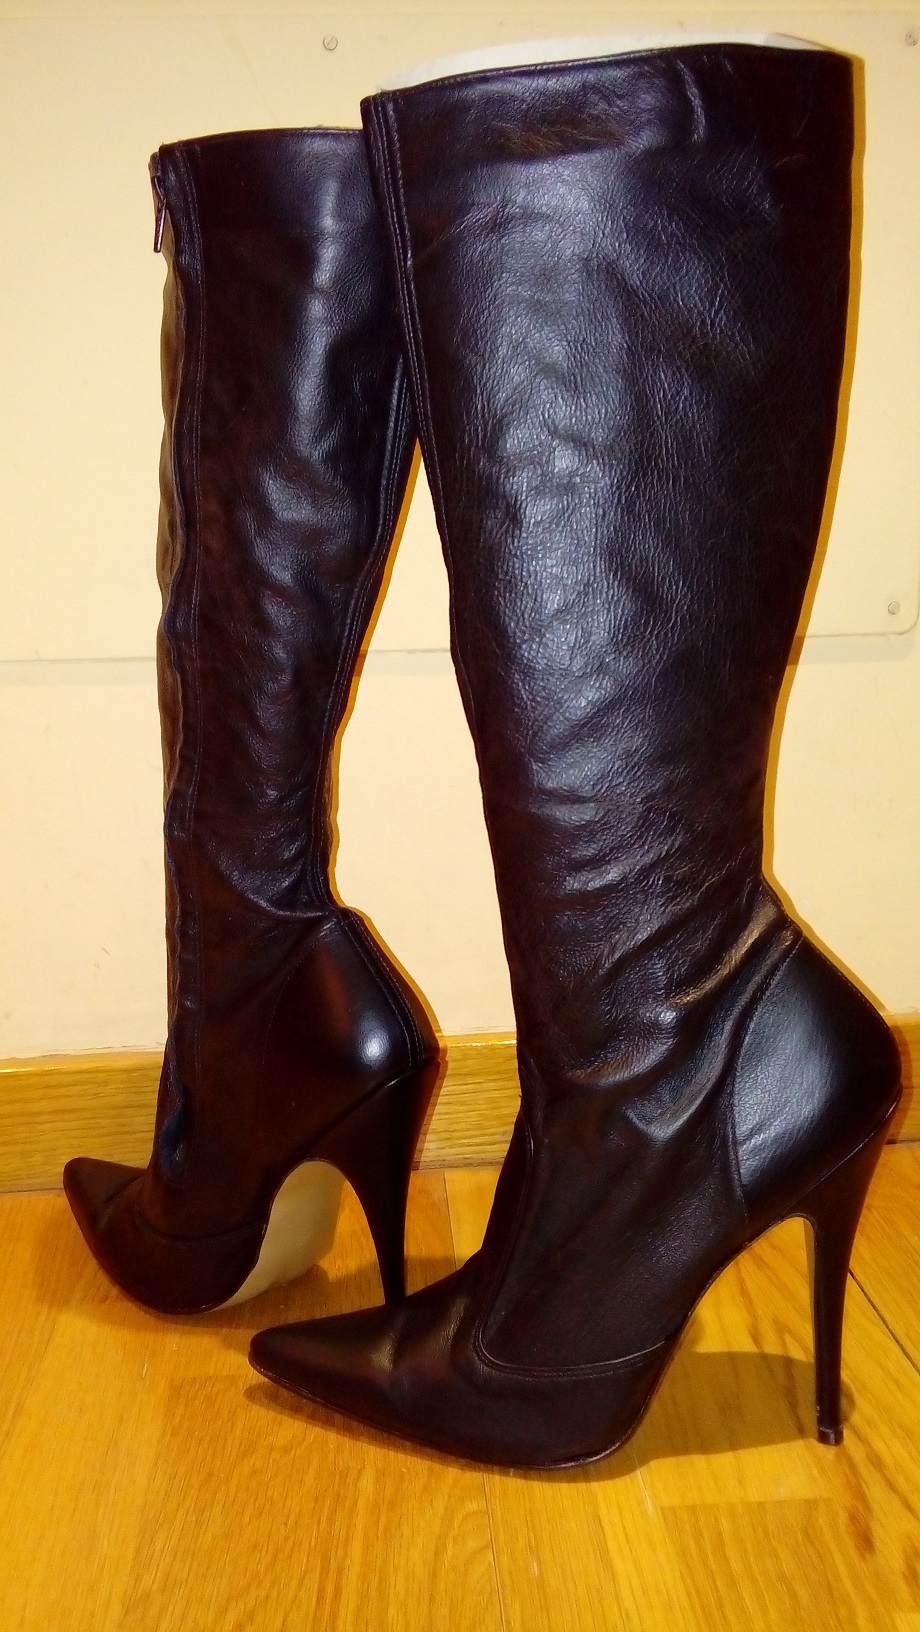 Black Leather Boots Size Uk10 5 From Leatherworks Buy